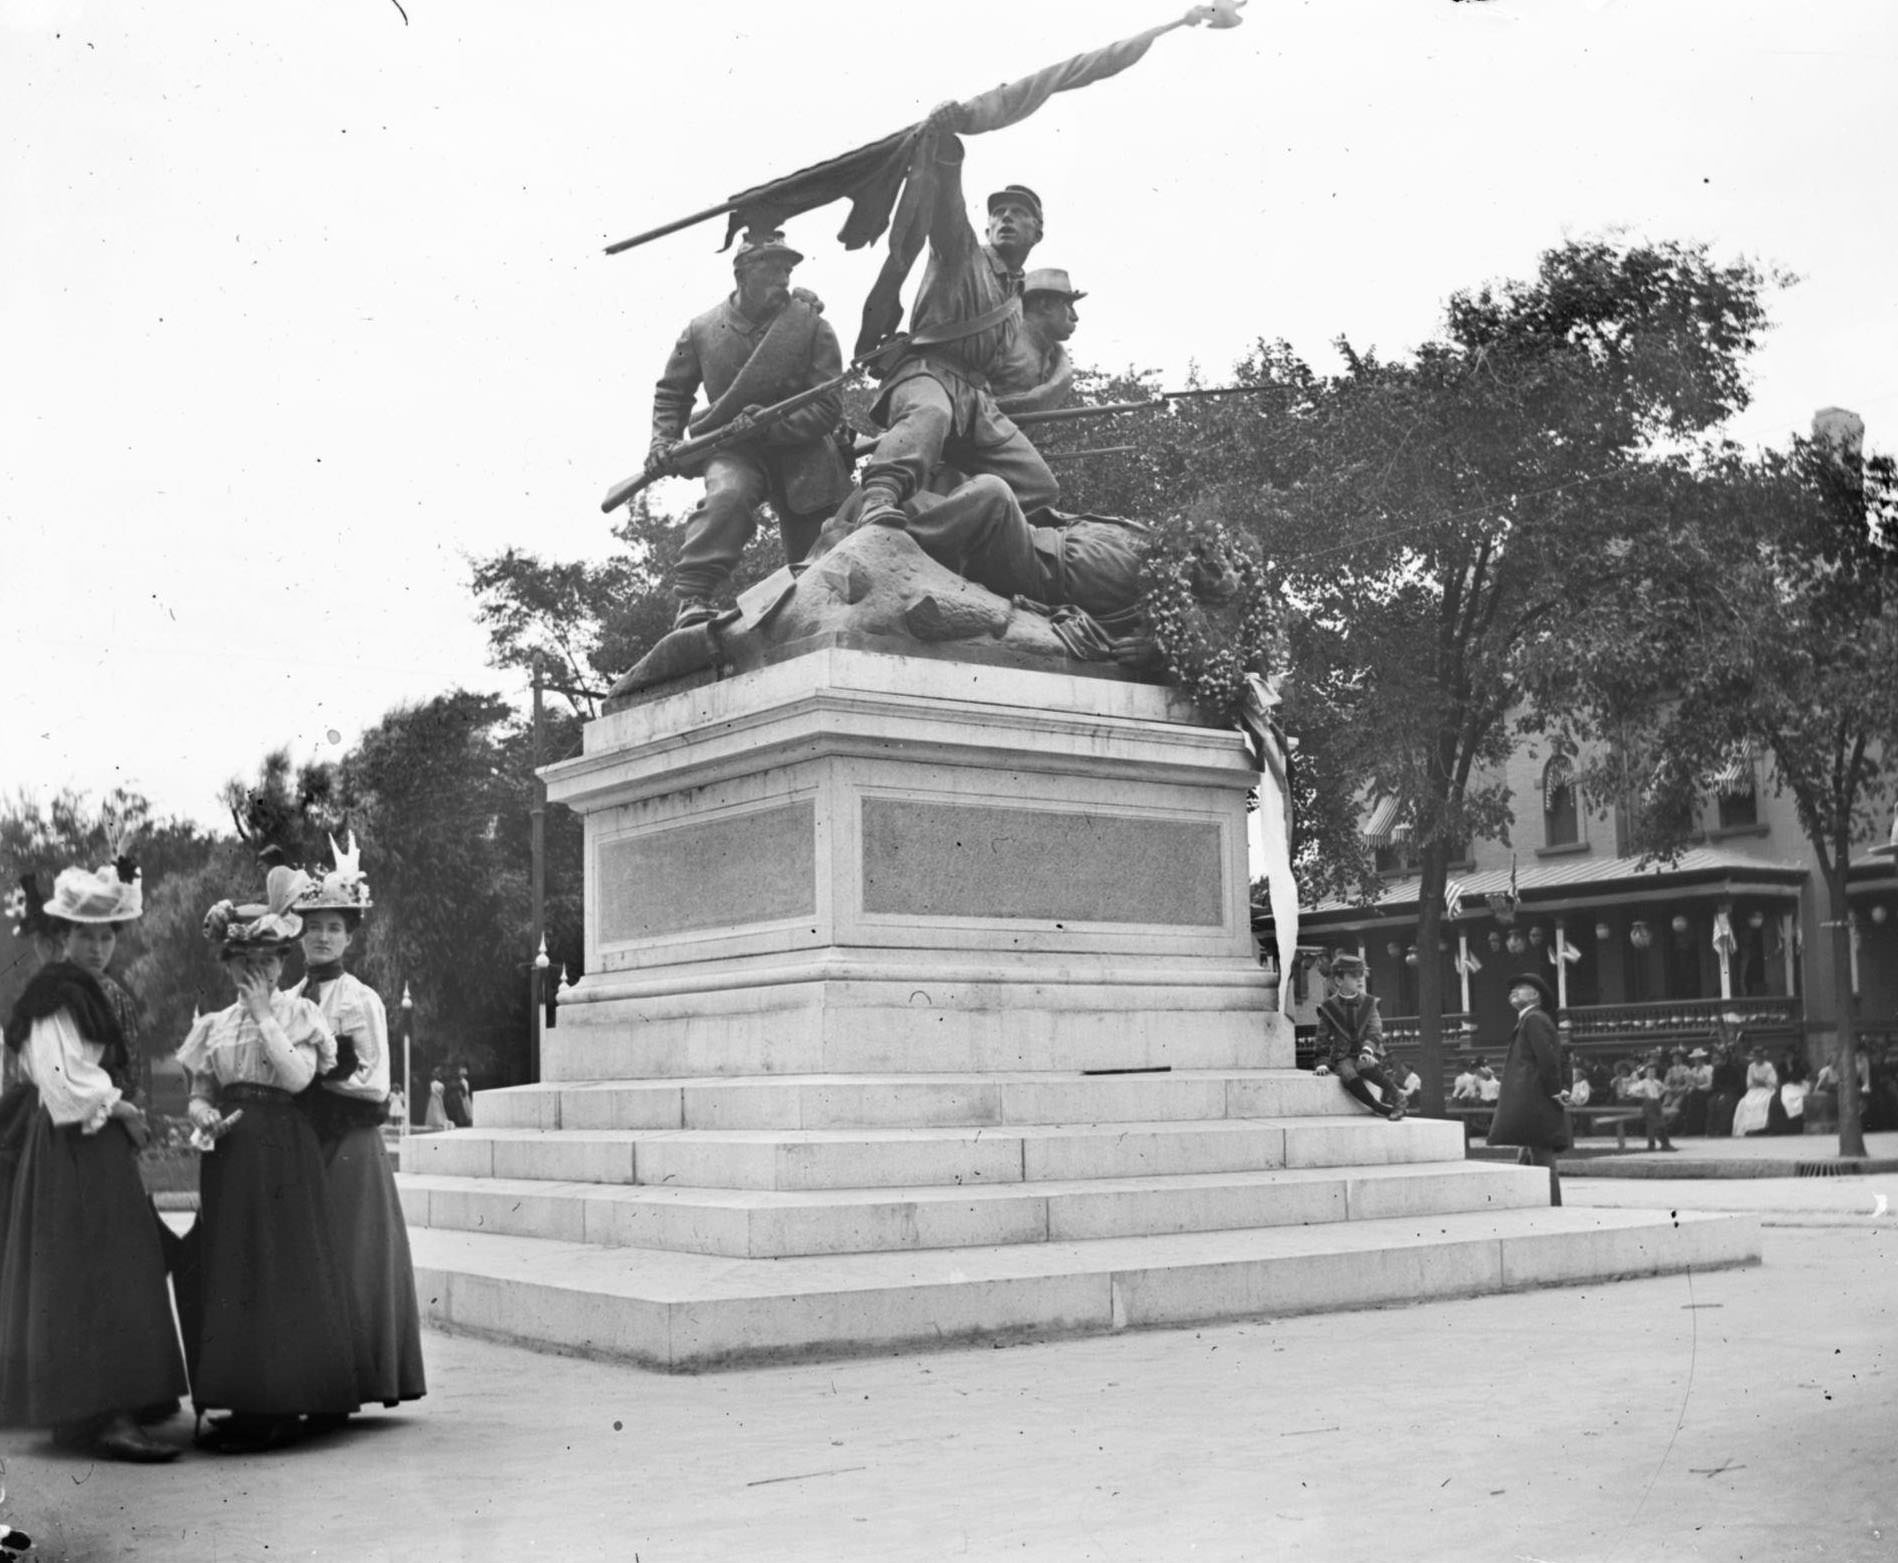 Women congregate near 'The Victorious Charge,' a monument to Soldiers who fought in the Civil War located in Milwaukee's Court of Honor on the median between the lanes of West Wisconsin Avenue, Milwaukee, Wisconsin, 1898.